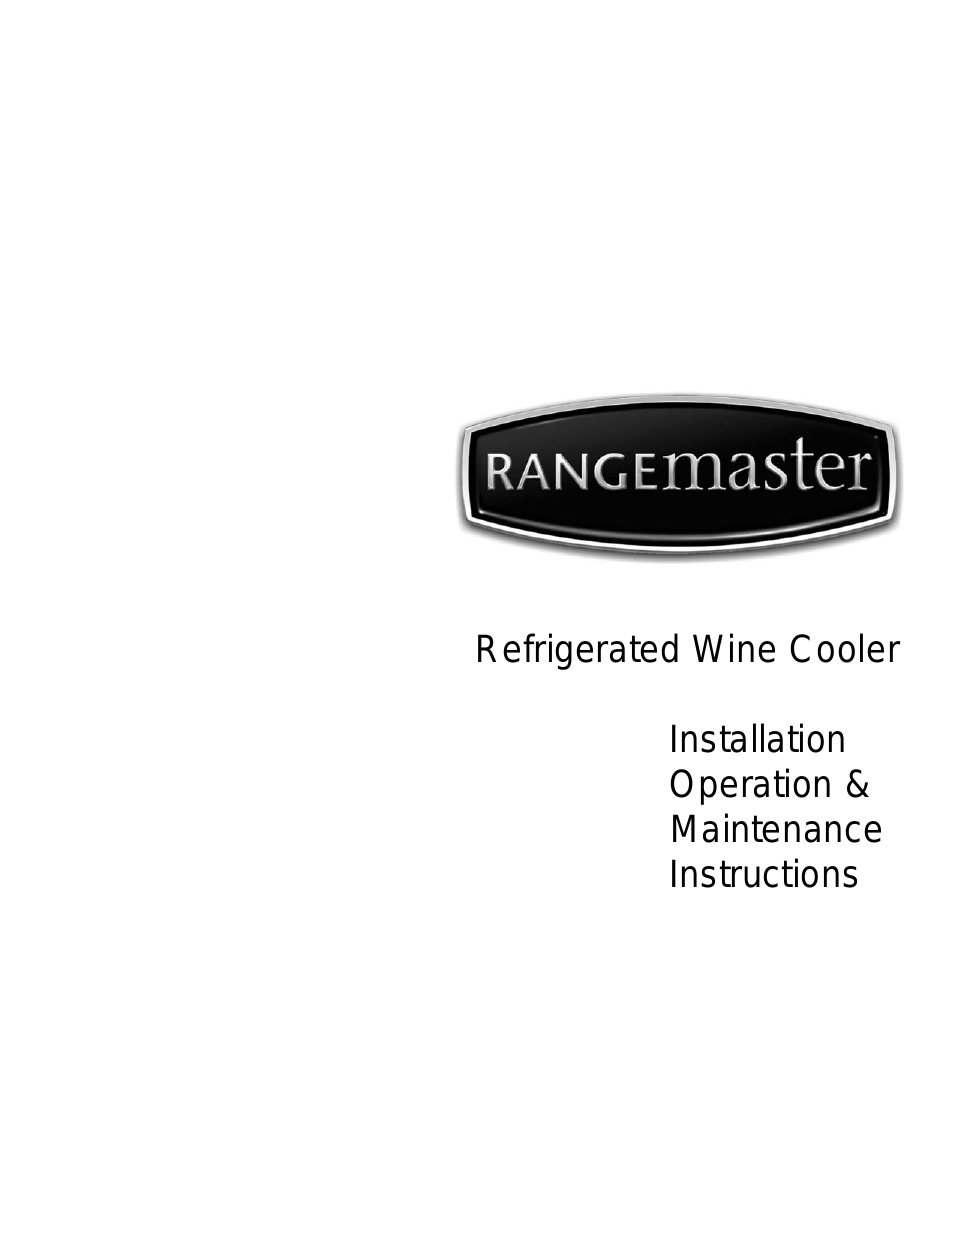 Refrigerated Wine Cooler